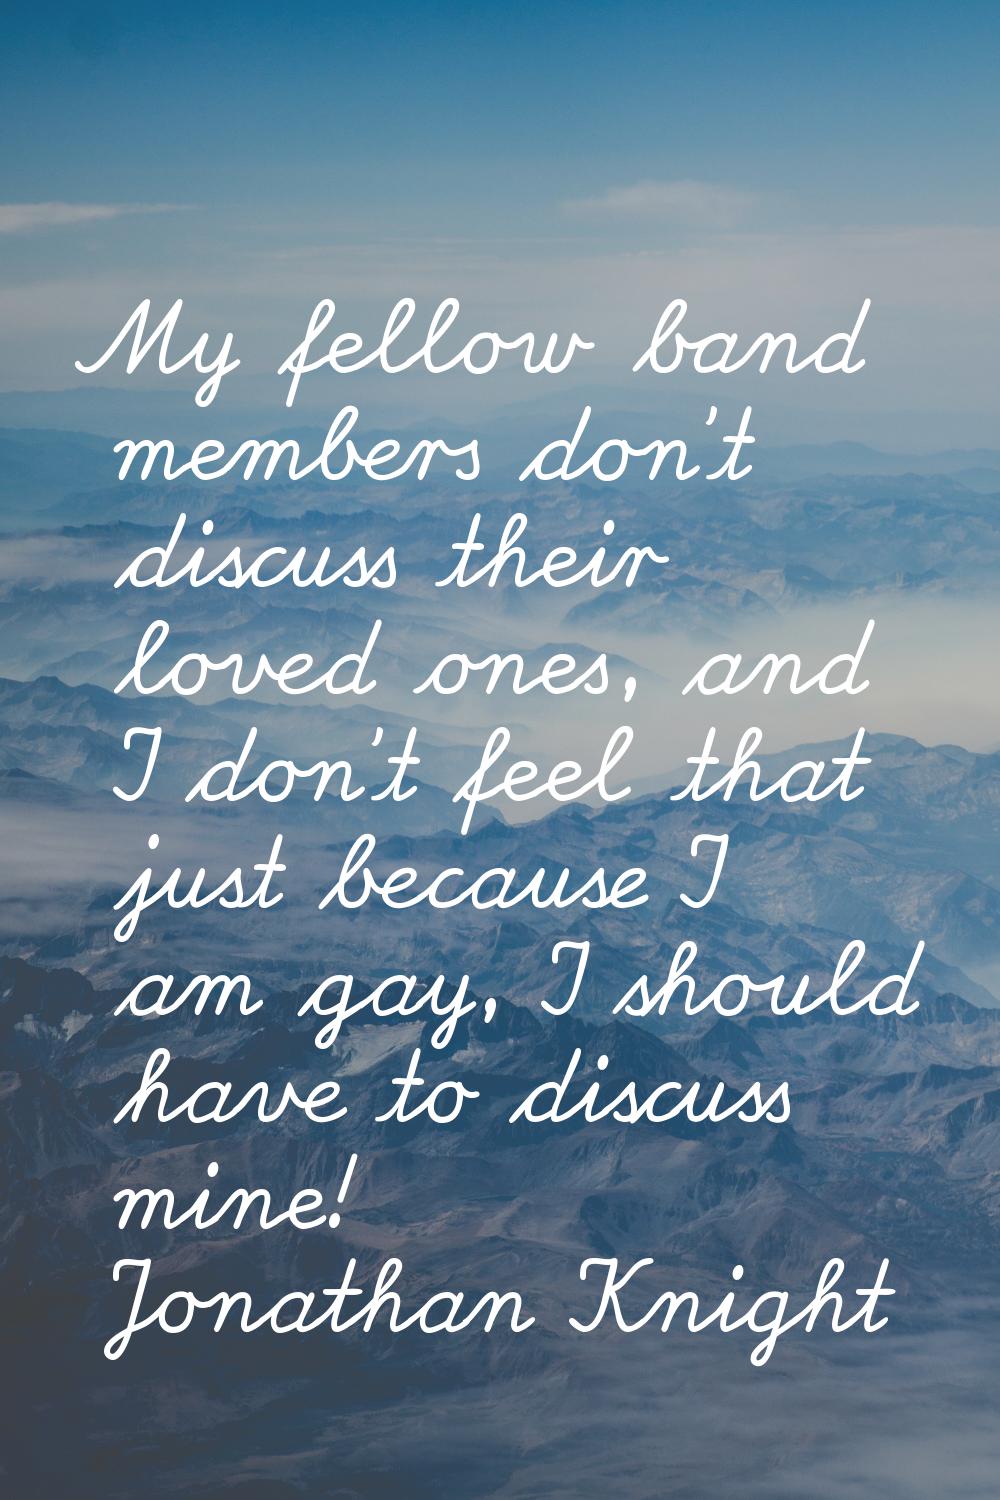 My fellow band members don't discuss their loved ones, and I don't feel that just because I am gay,